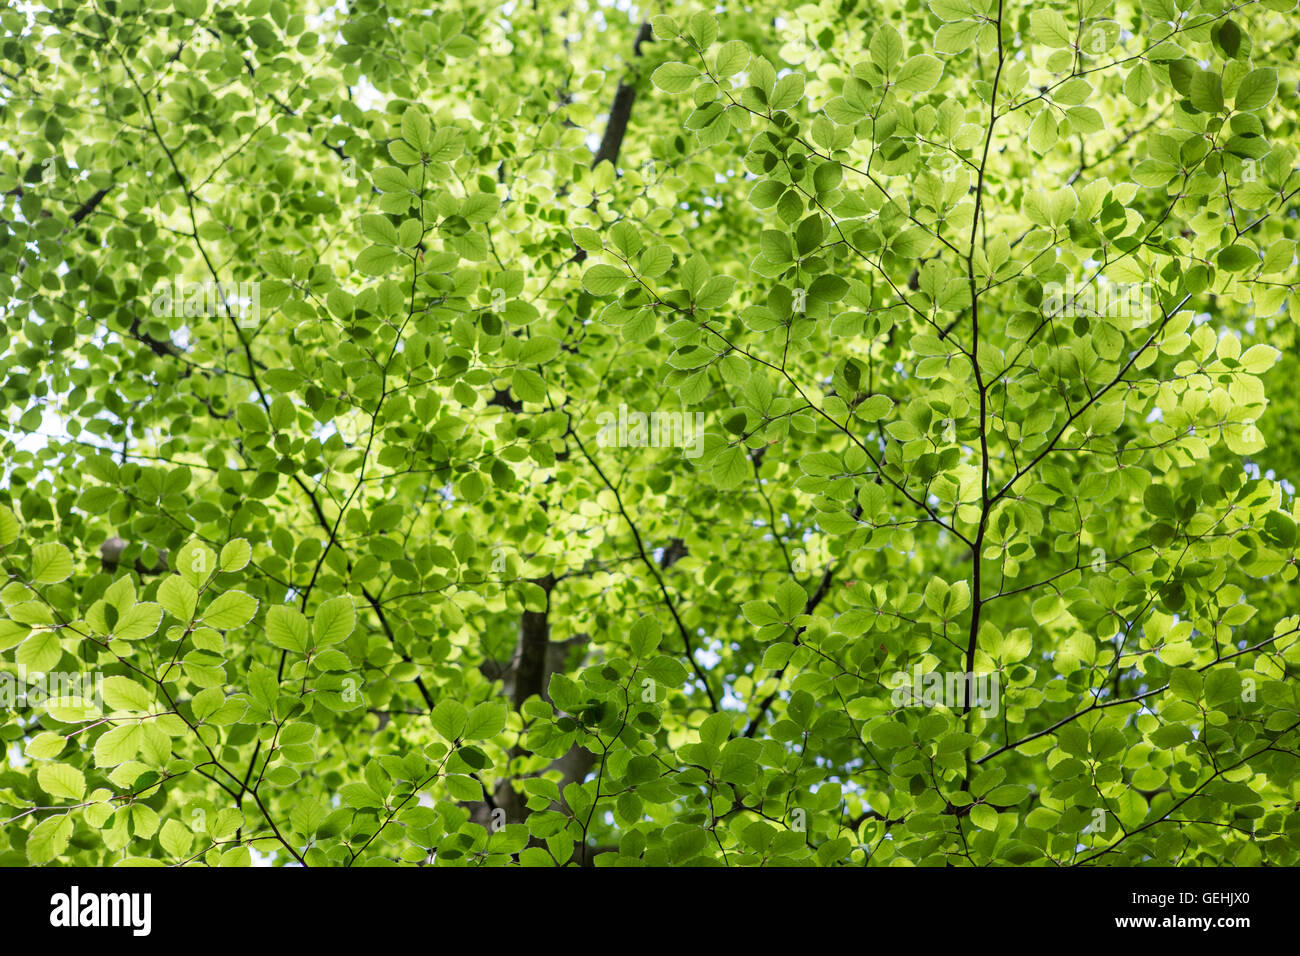 Shafts of sunlight making the leaves of a tree glow as it passes through the vegitation. In this tightly packed dense forest the light looks almost surreal as it illumintates the darkness. Stock Photo